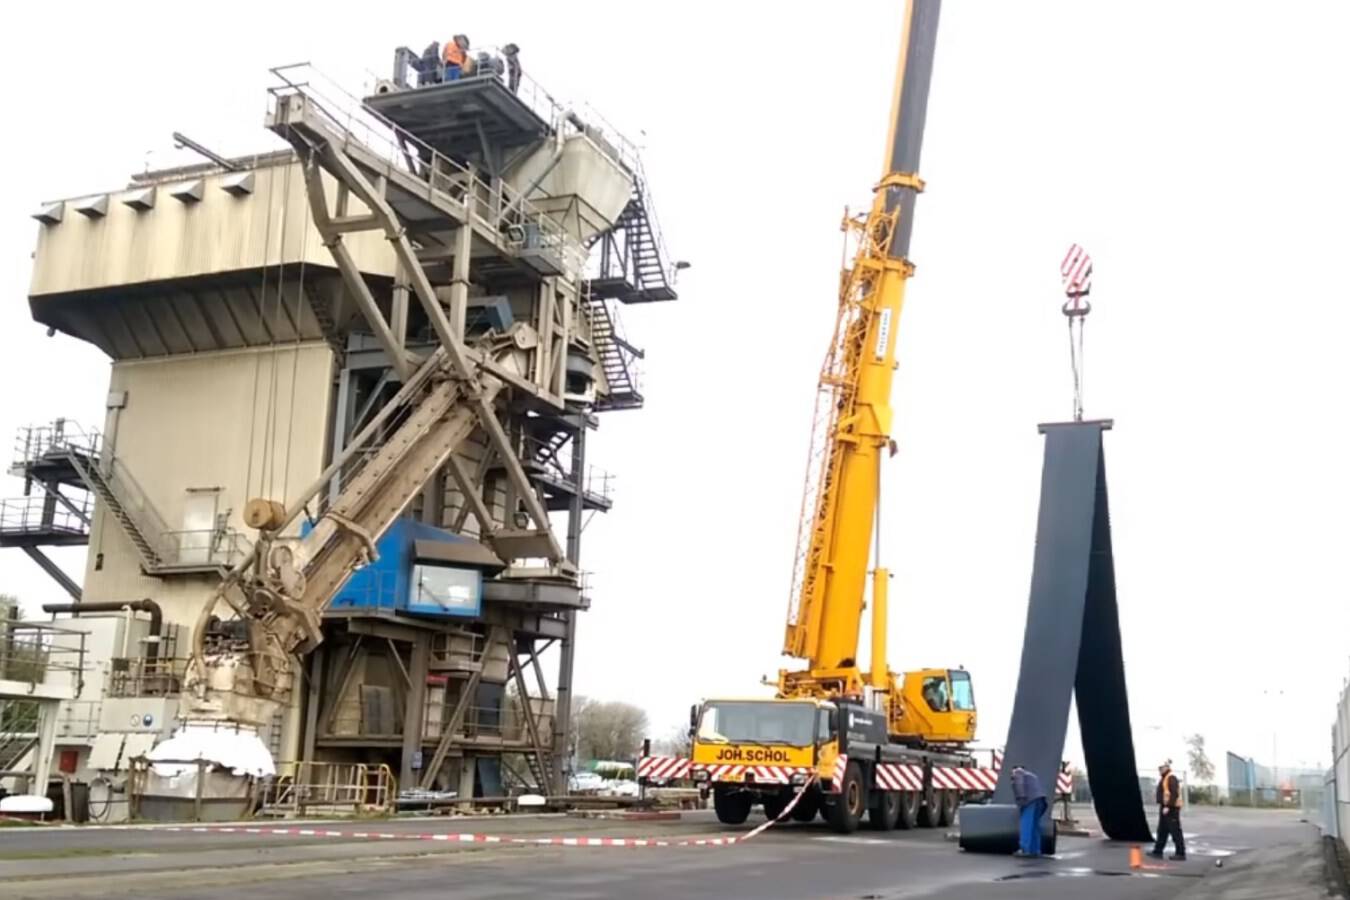 Inspection and overhaul of IGMA Amsterdam terminal elevator Overhaul makes elevator better than ever.  Muller Beltex has worked for IGMA for many years and is jointly responsible for the installations.